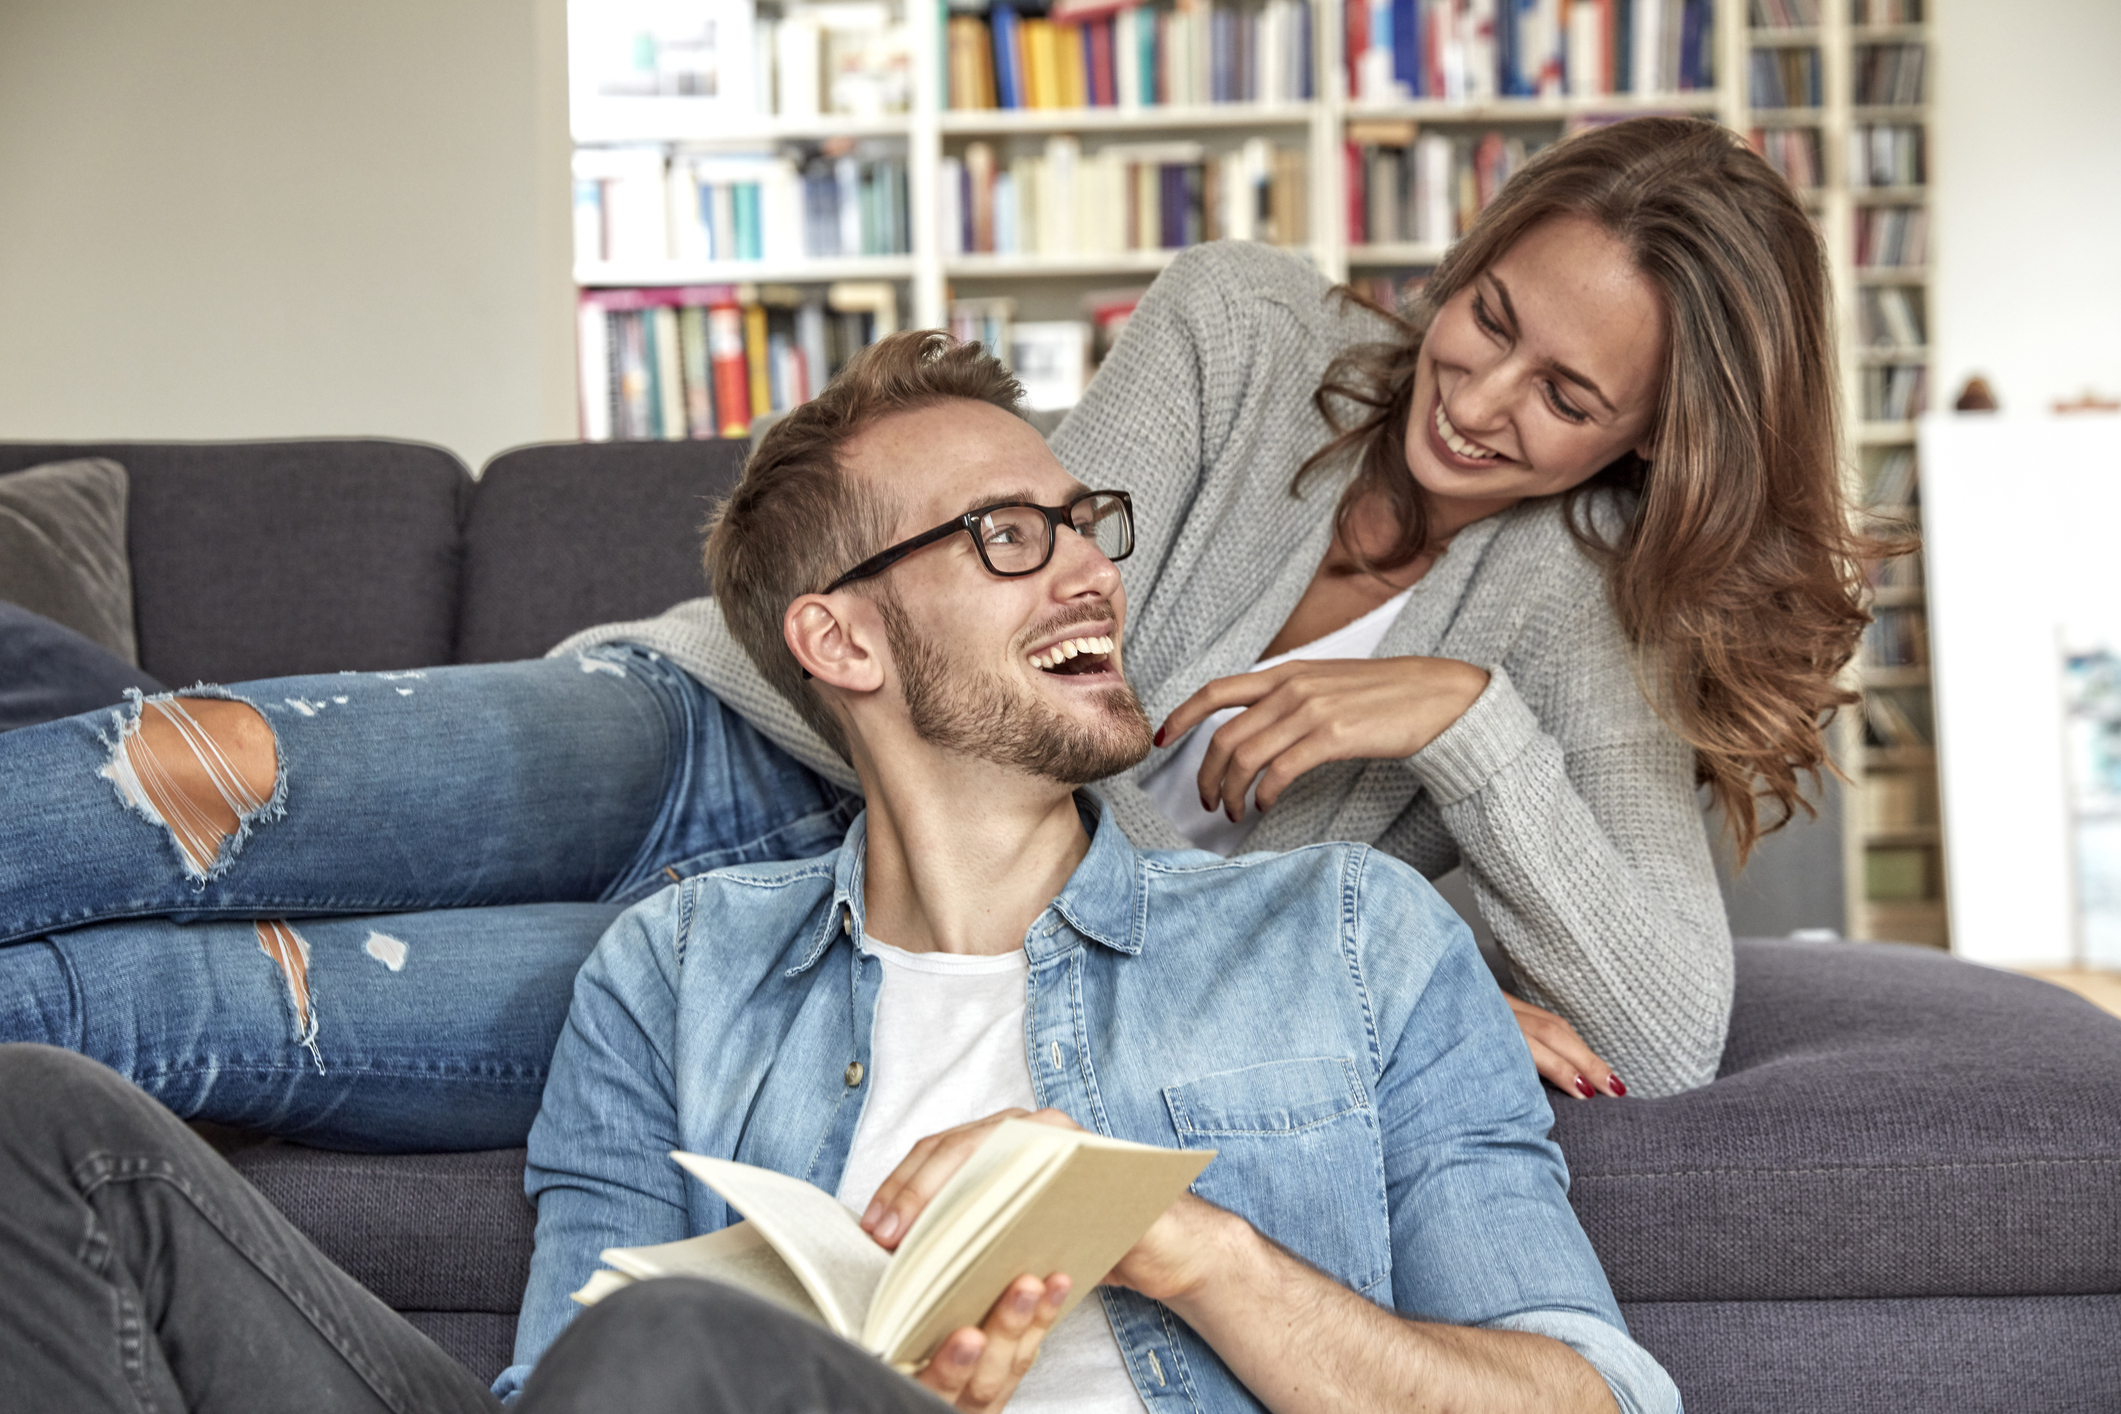 15 Of The Best Relationship Books To Keep Yours Healthy